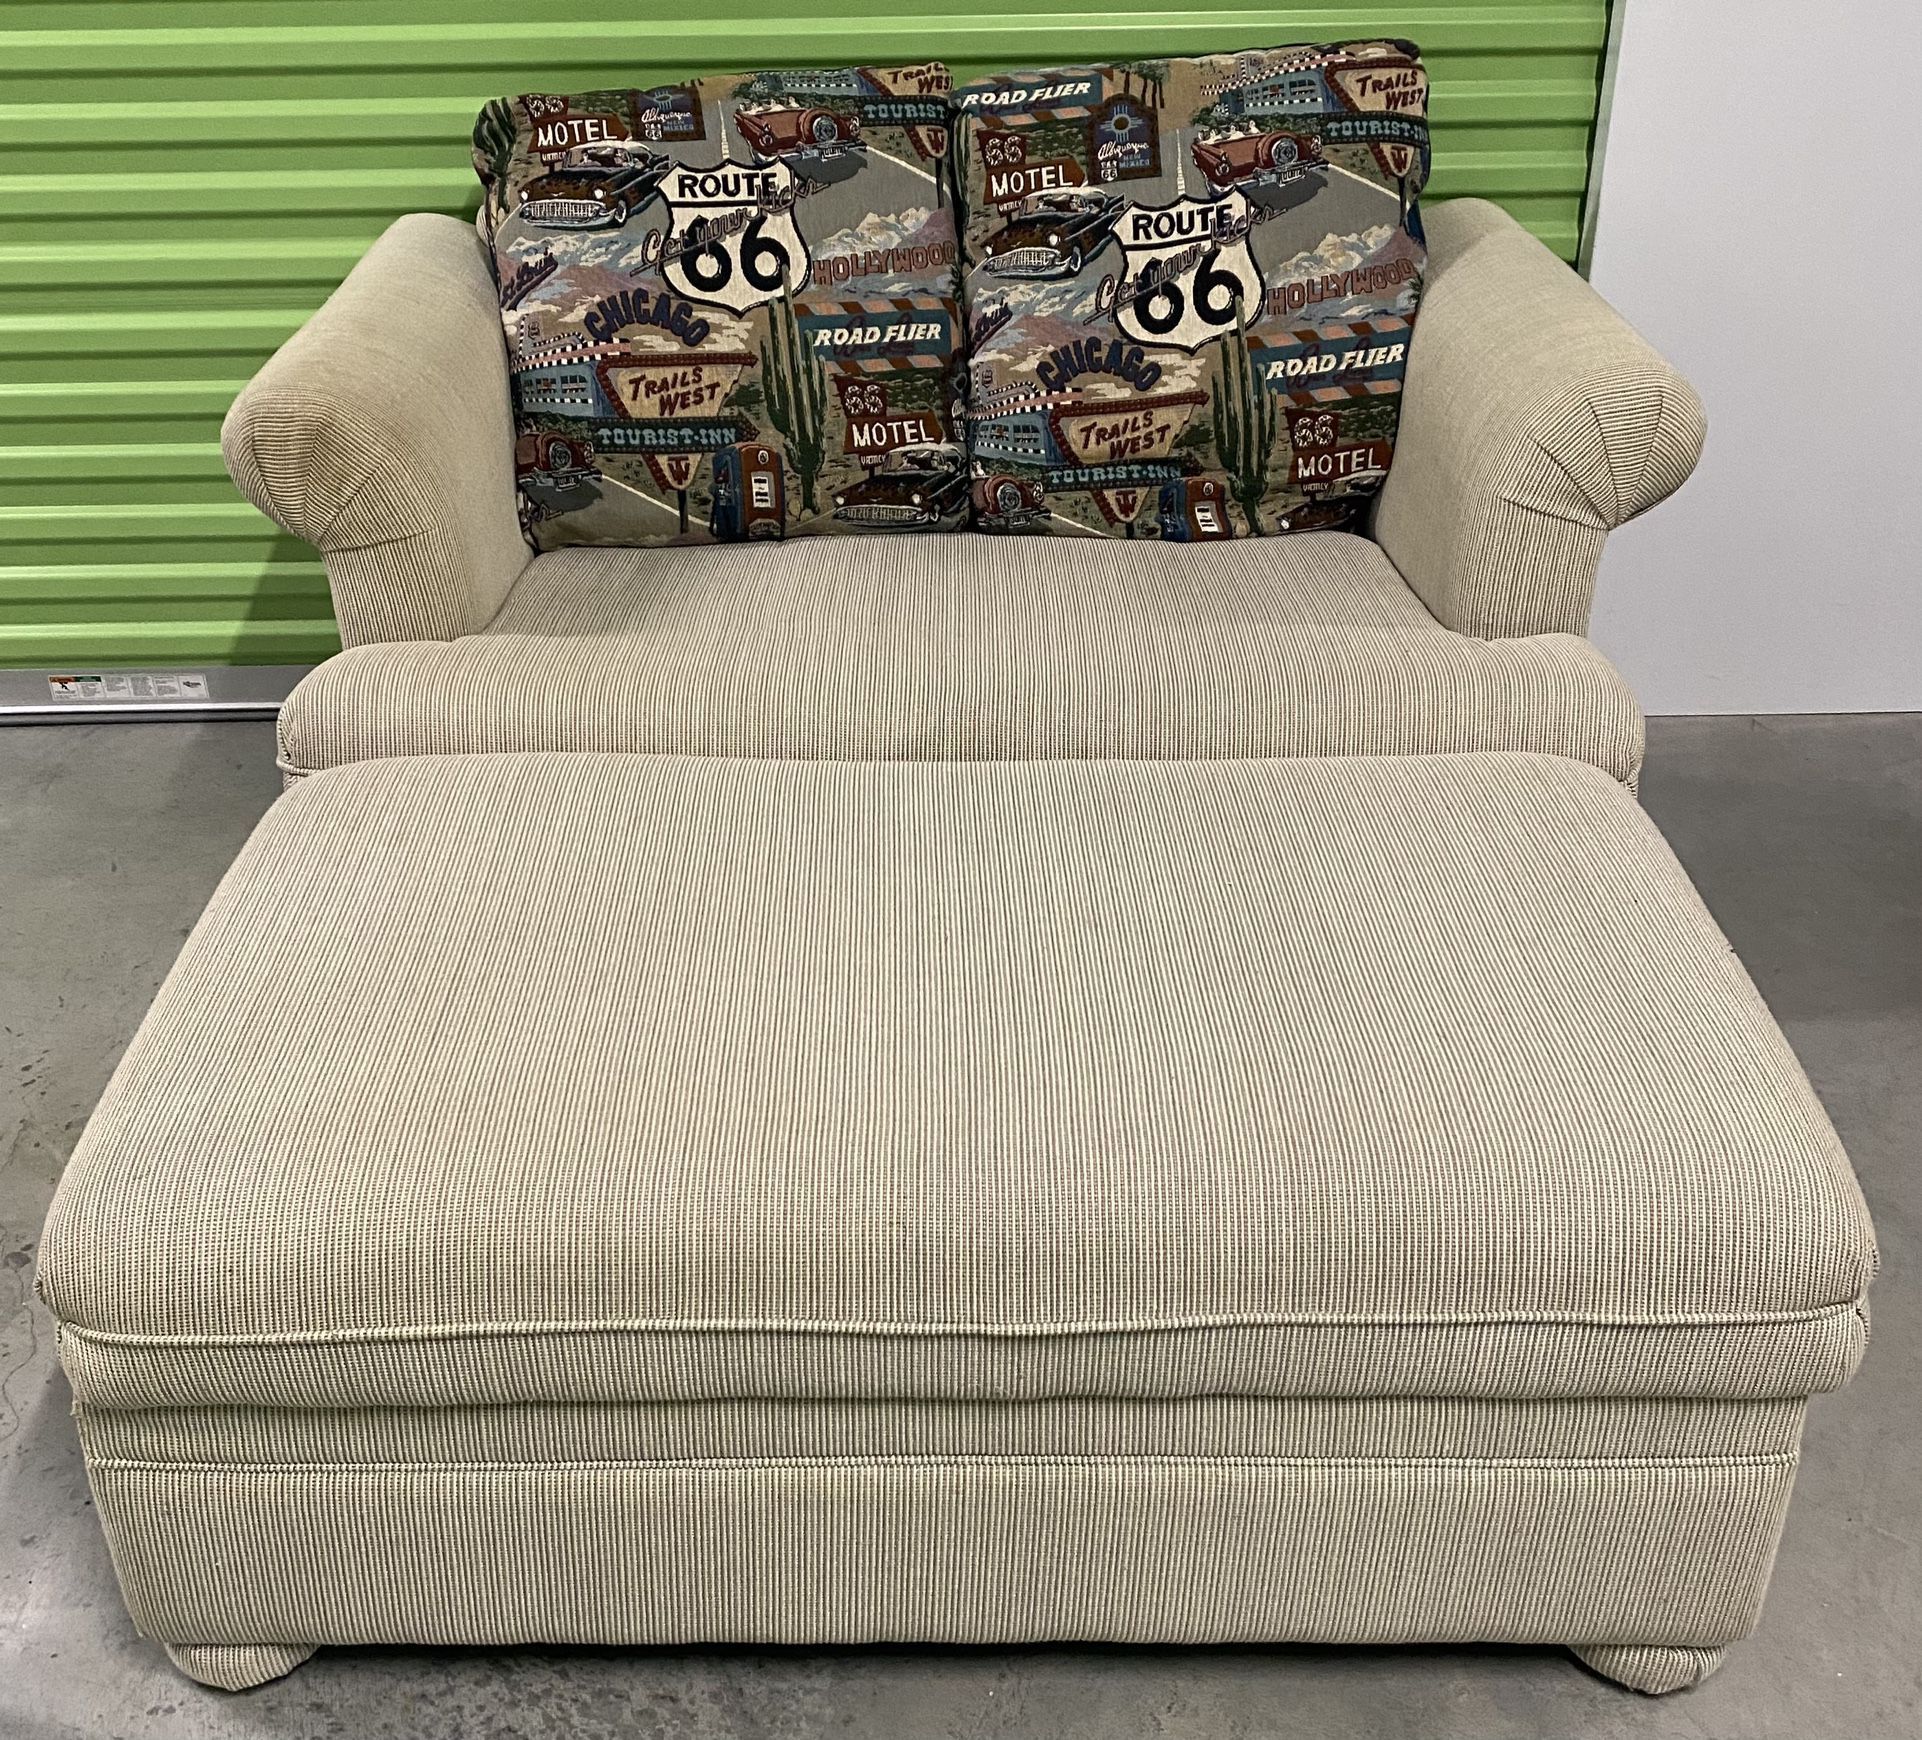 Wide Love Seat + Ottoman + Pull-Out Sleeper Twin Bed! OBO